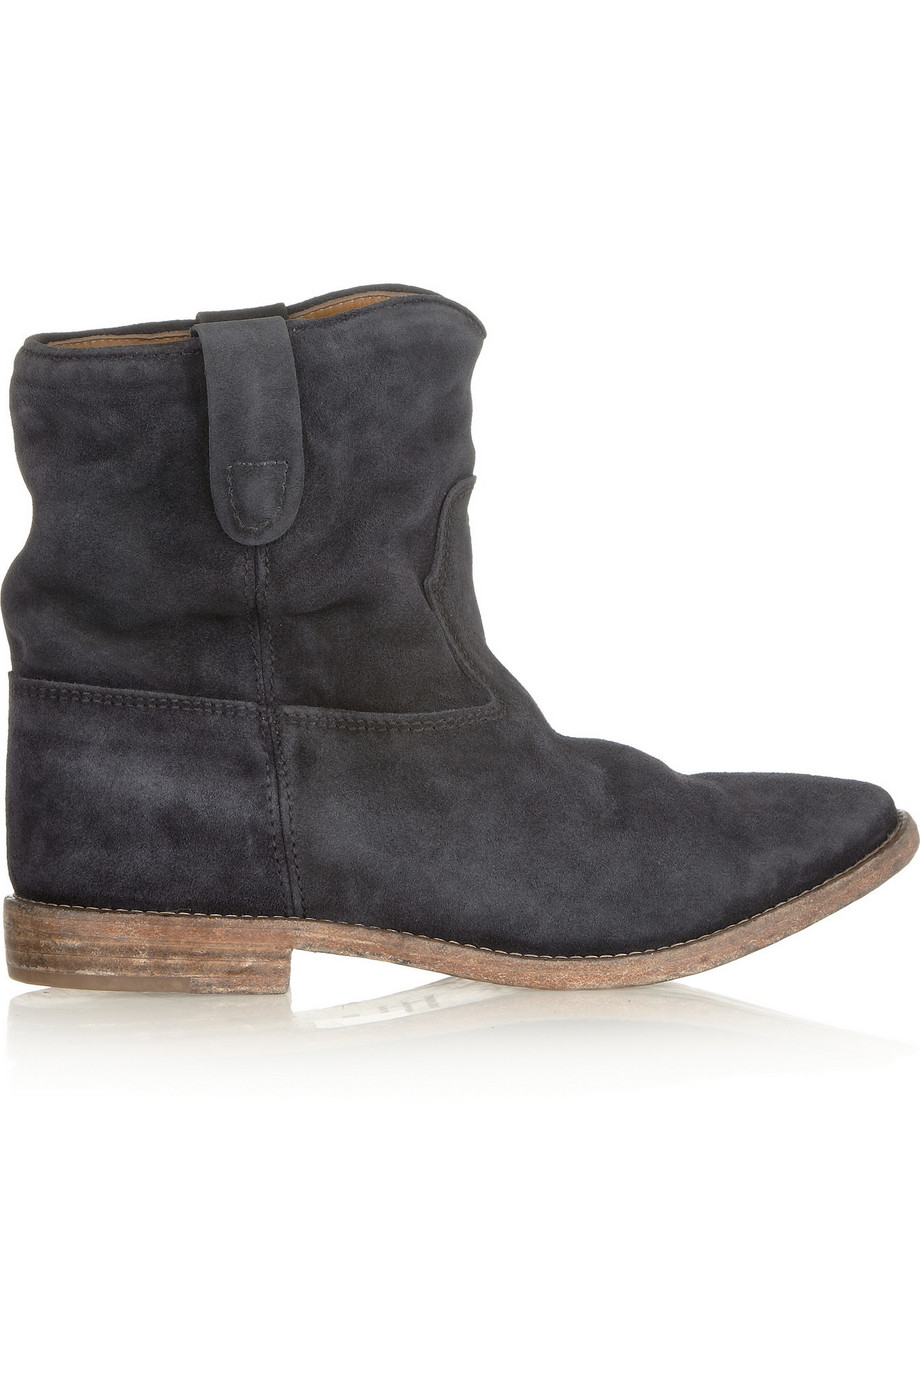 lineær Snart Penneven Isabel Marant Crisi Ankle Boots in Faded-Anthracite Suede — UFO No More